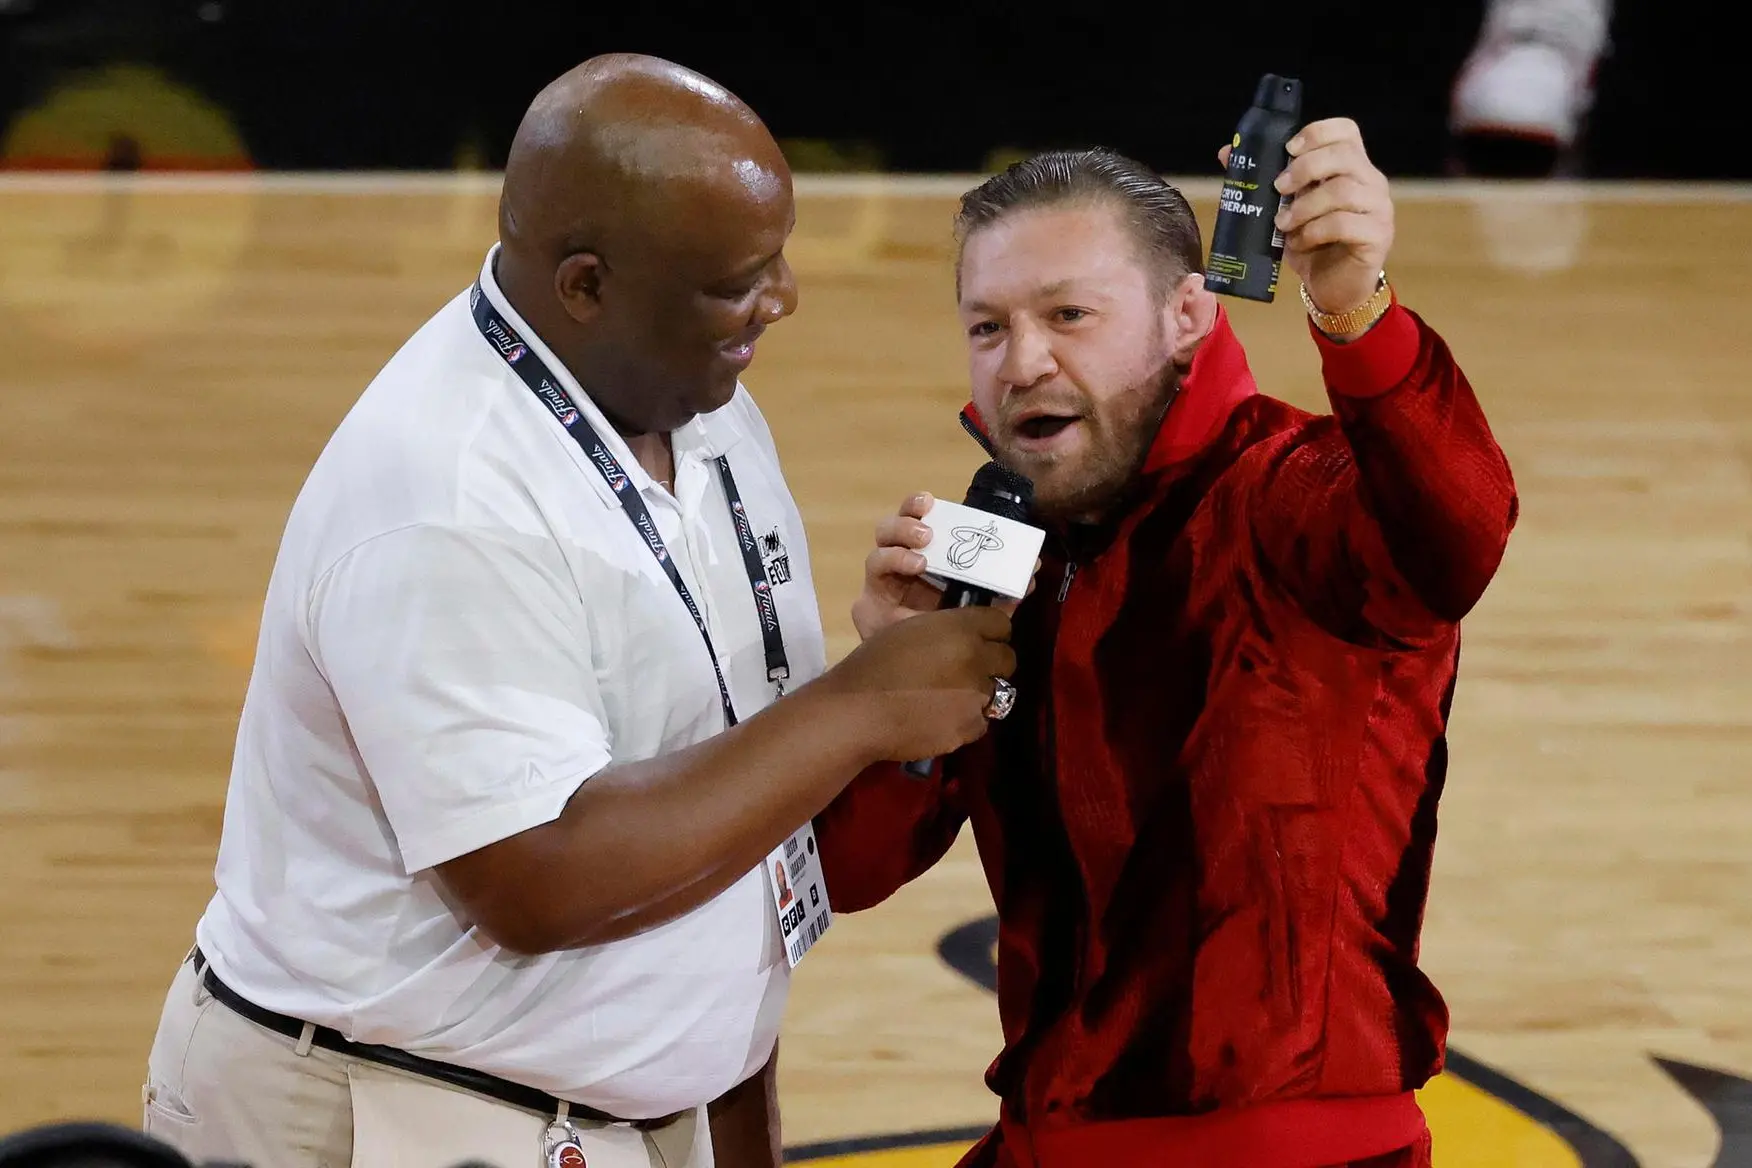 epa10684683 Irish mixed martial artist Conor McGregor (R) speaks during half-time in game four of the NBA Finals between the Denver Nuggets and Miami Heat at Kaseya Center in Miami, Florida, USA, 09 June 2023 (issued 11 June 2023). EPA/RHONA WISE SHUTTERSTOCK OUT